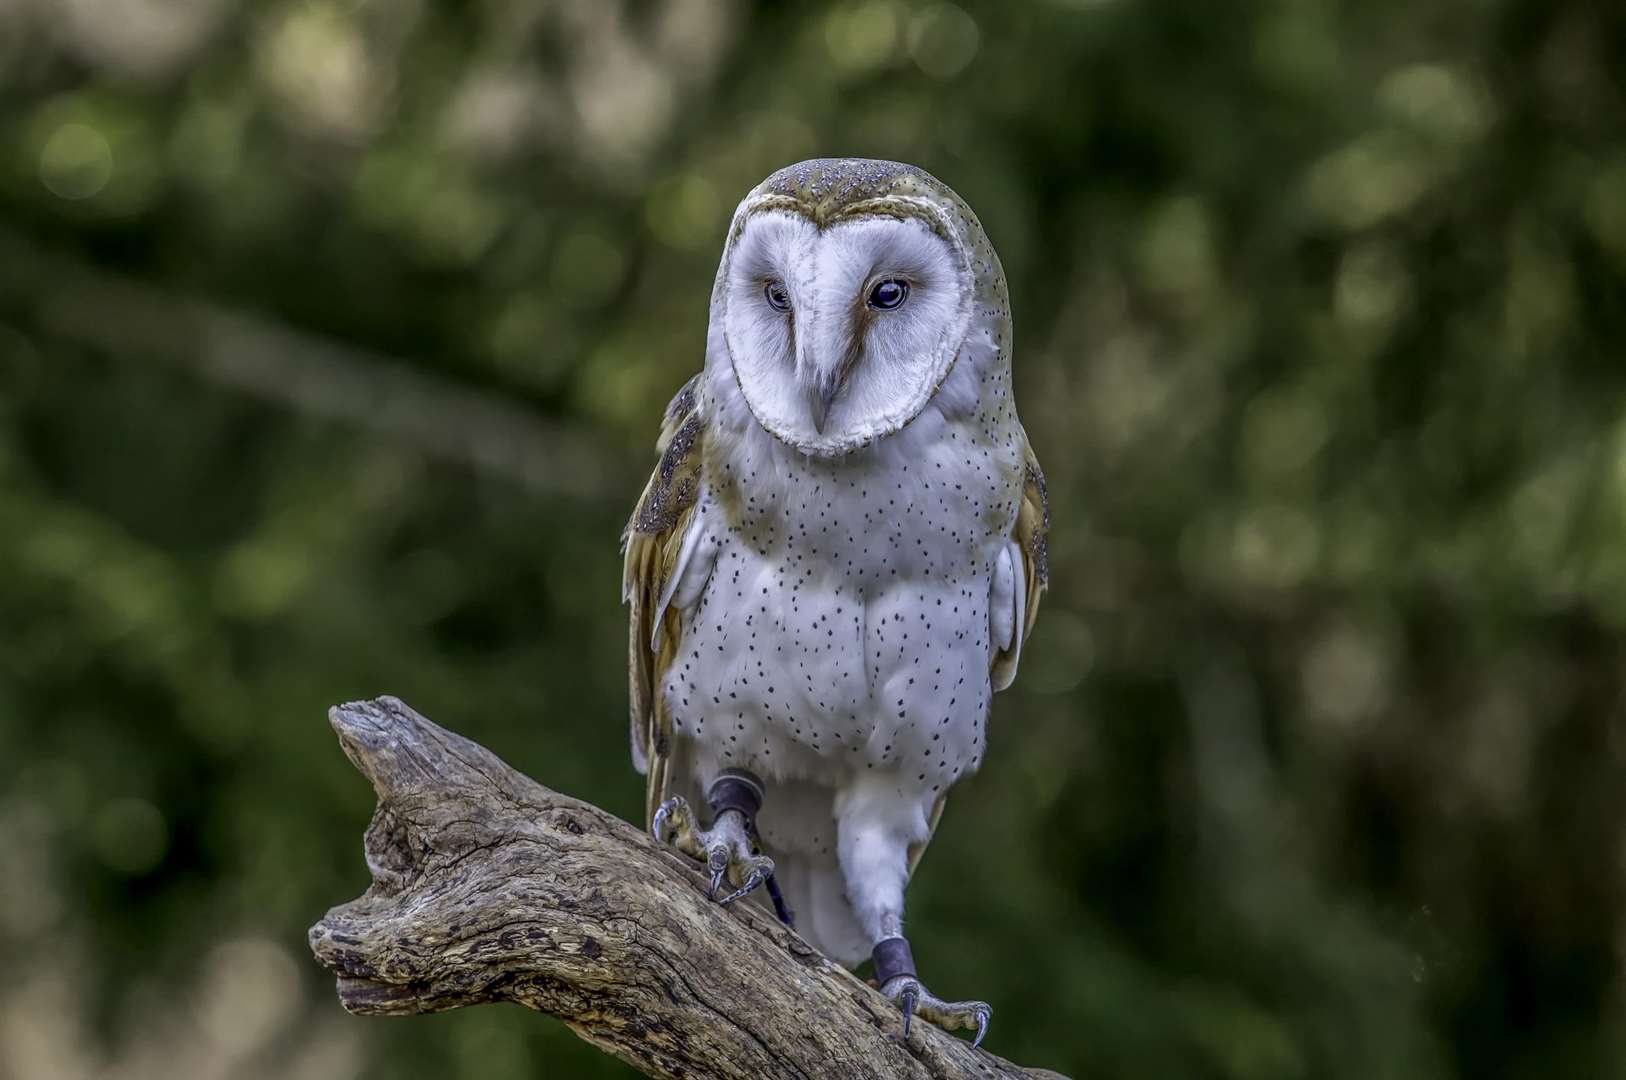 Barn owl on a branch in the woods. Stock image